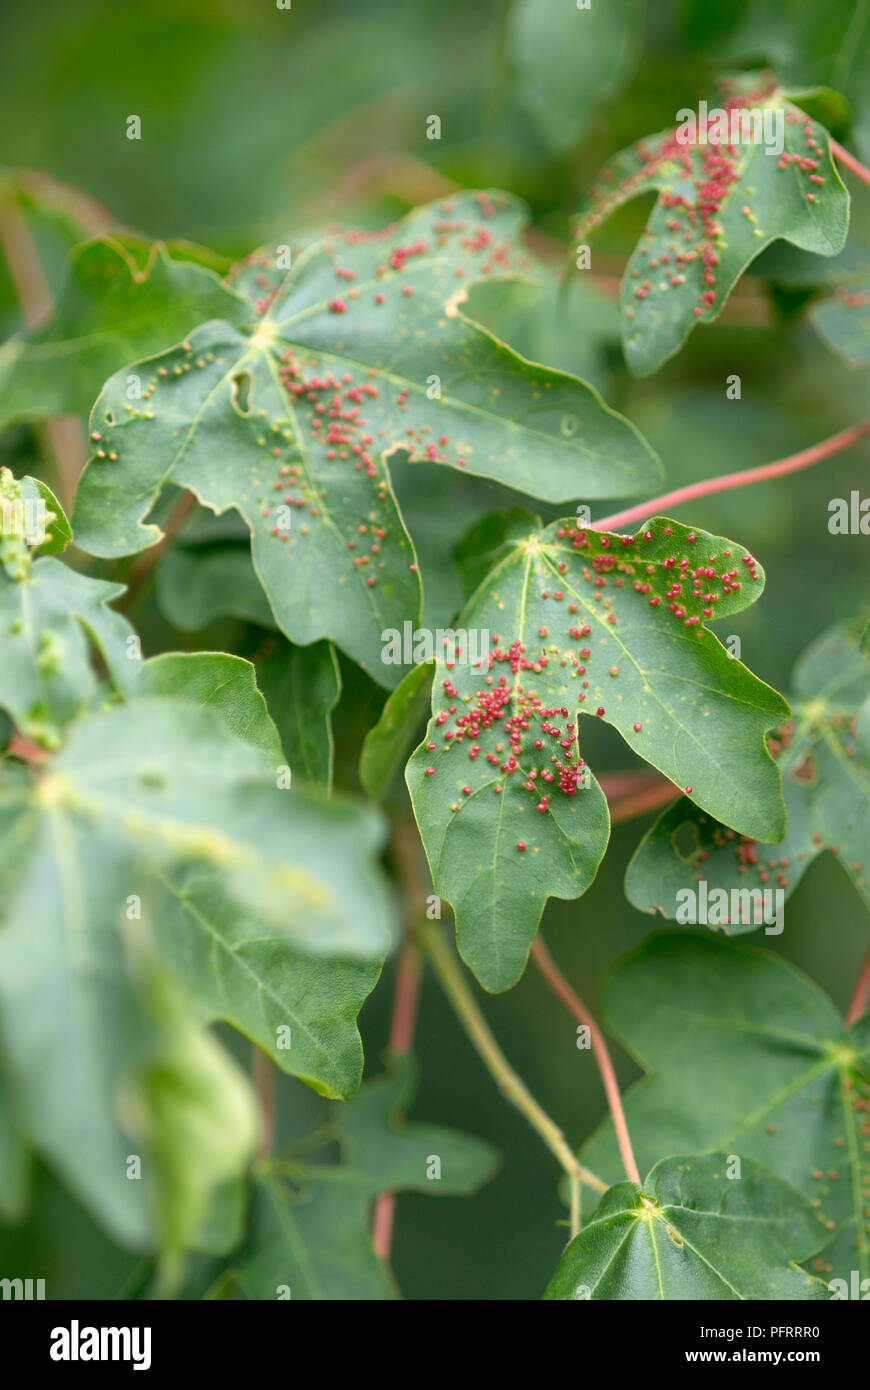 Acer sp. (Maple) leaves infested with Gall mites (Eriophyidae) Stock Photo